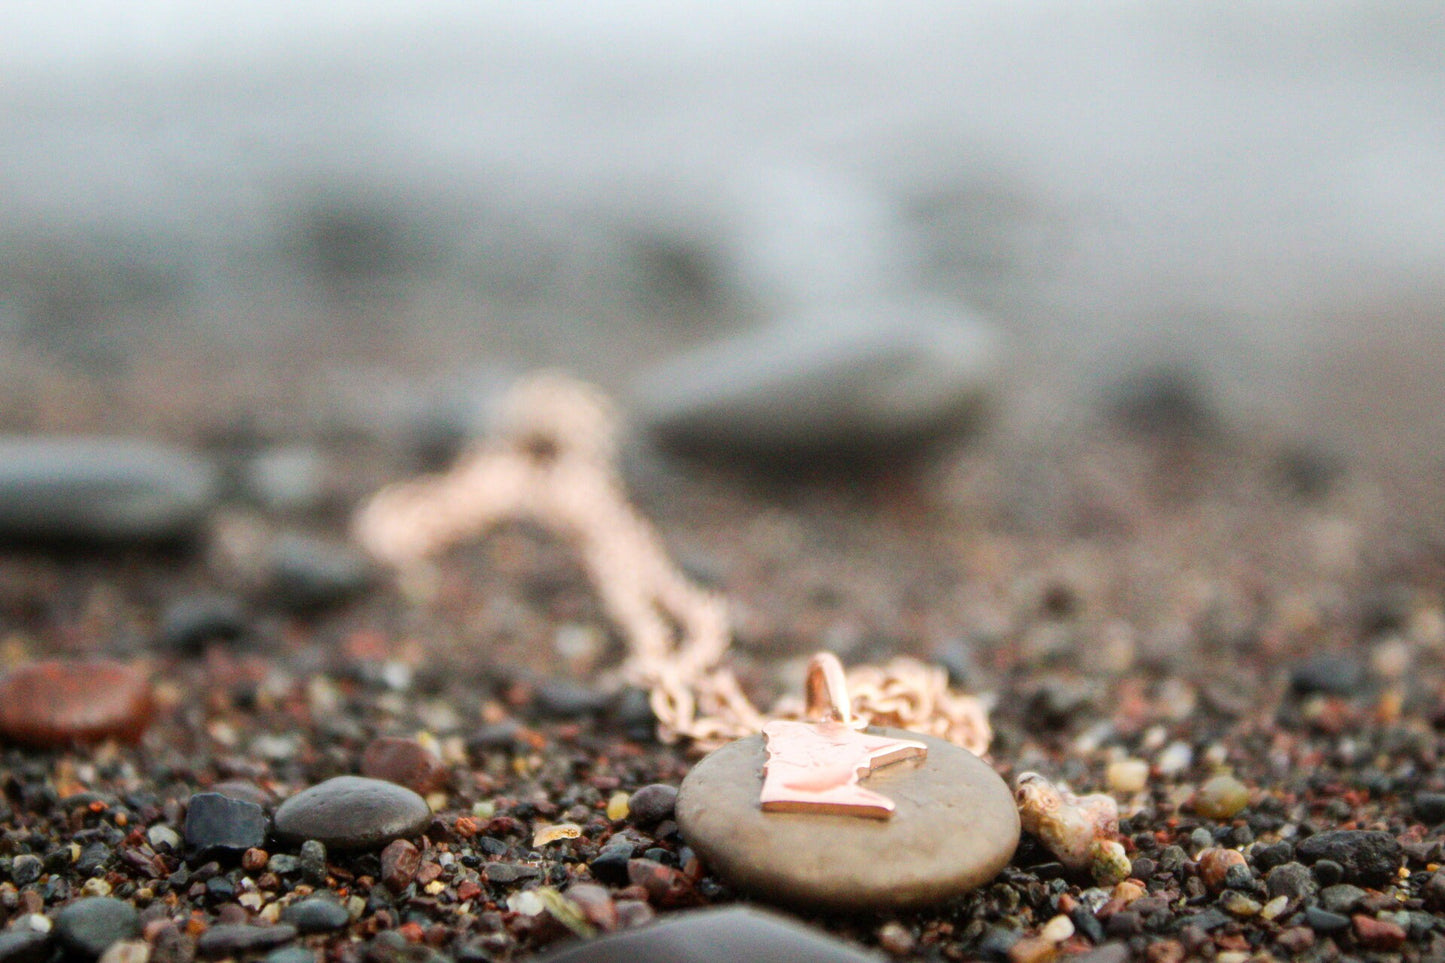 Lake Superior Stone Necklace with Rose Gold or Silver Charm 